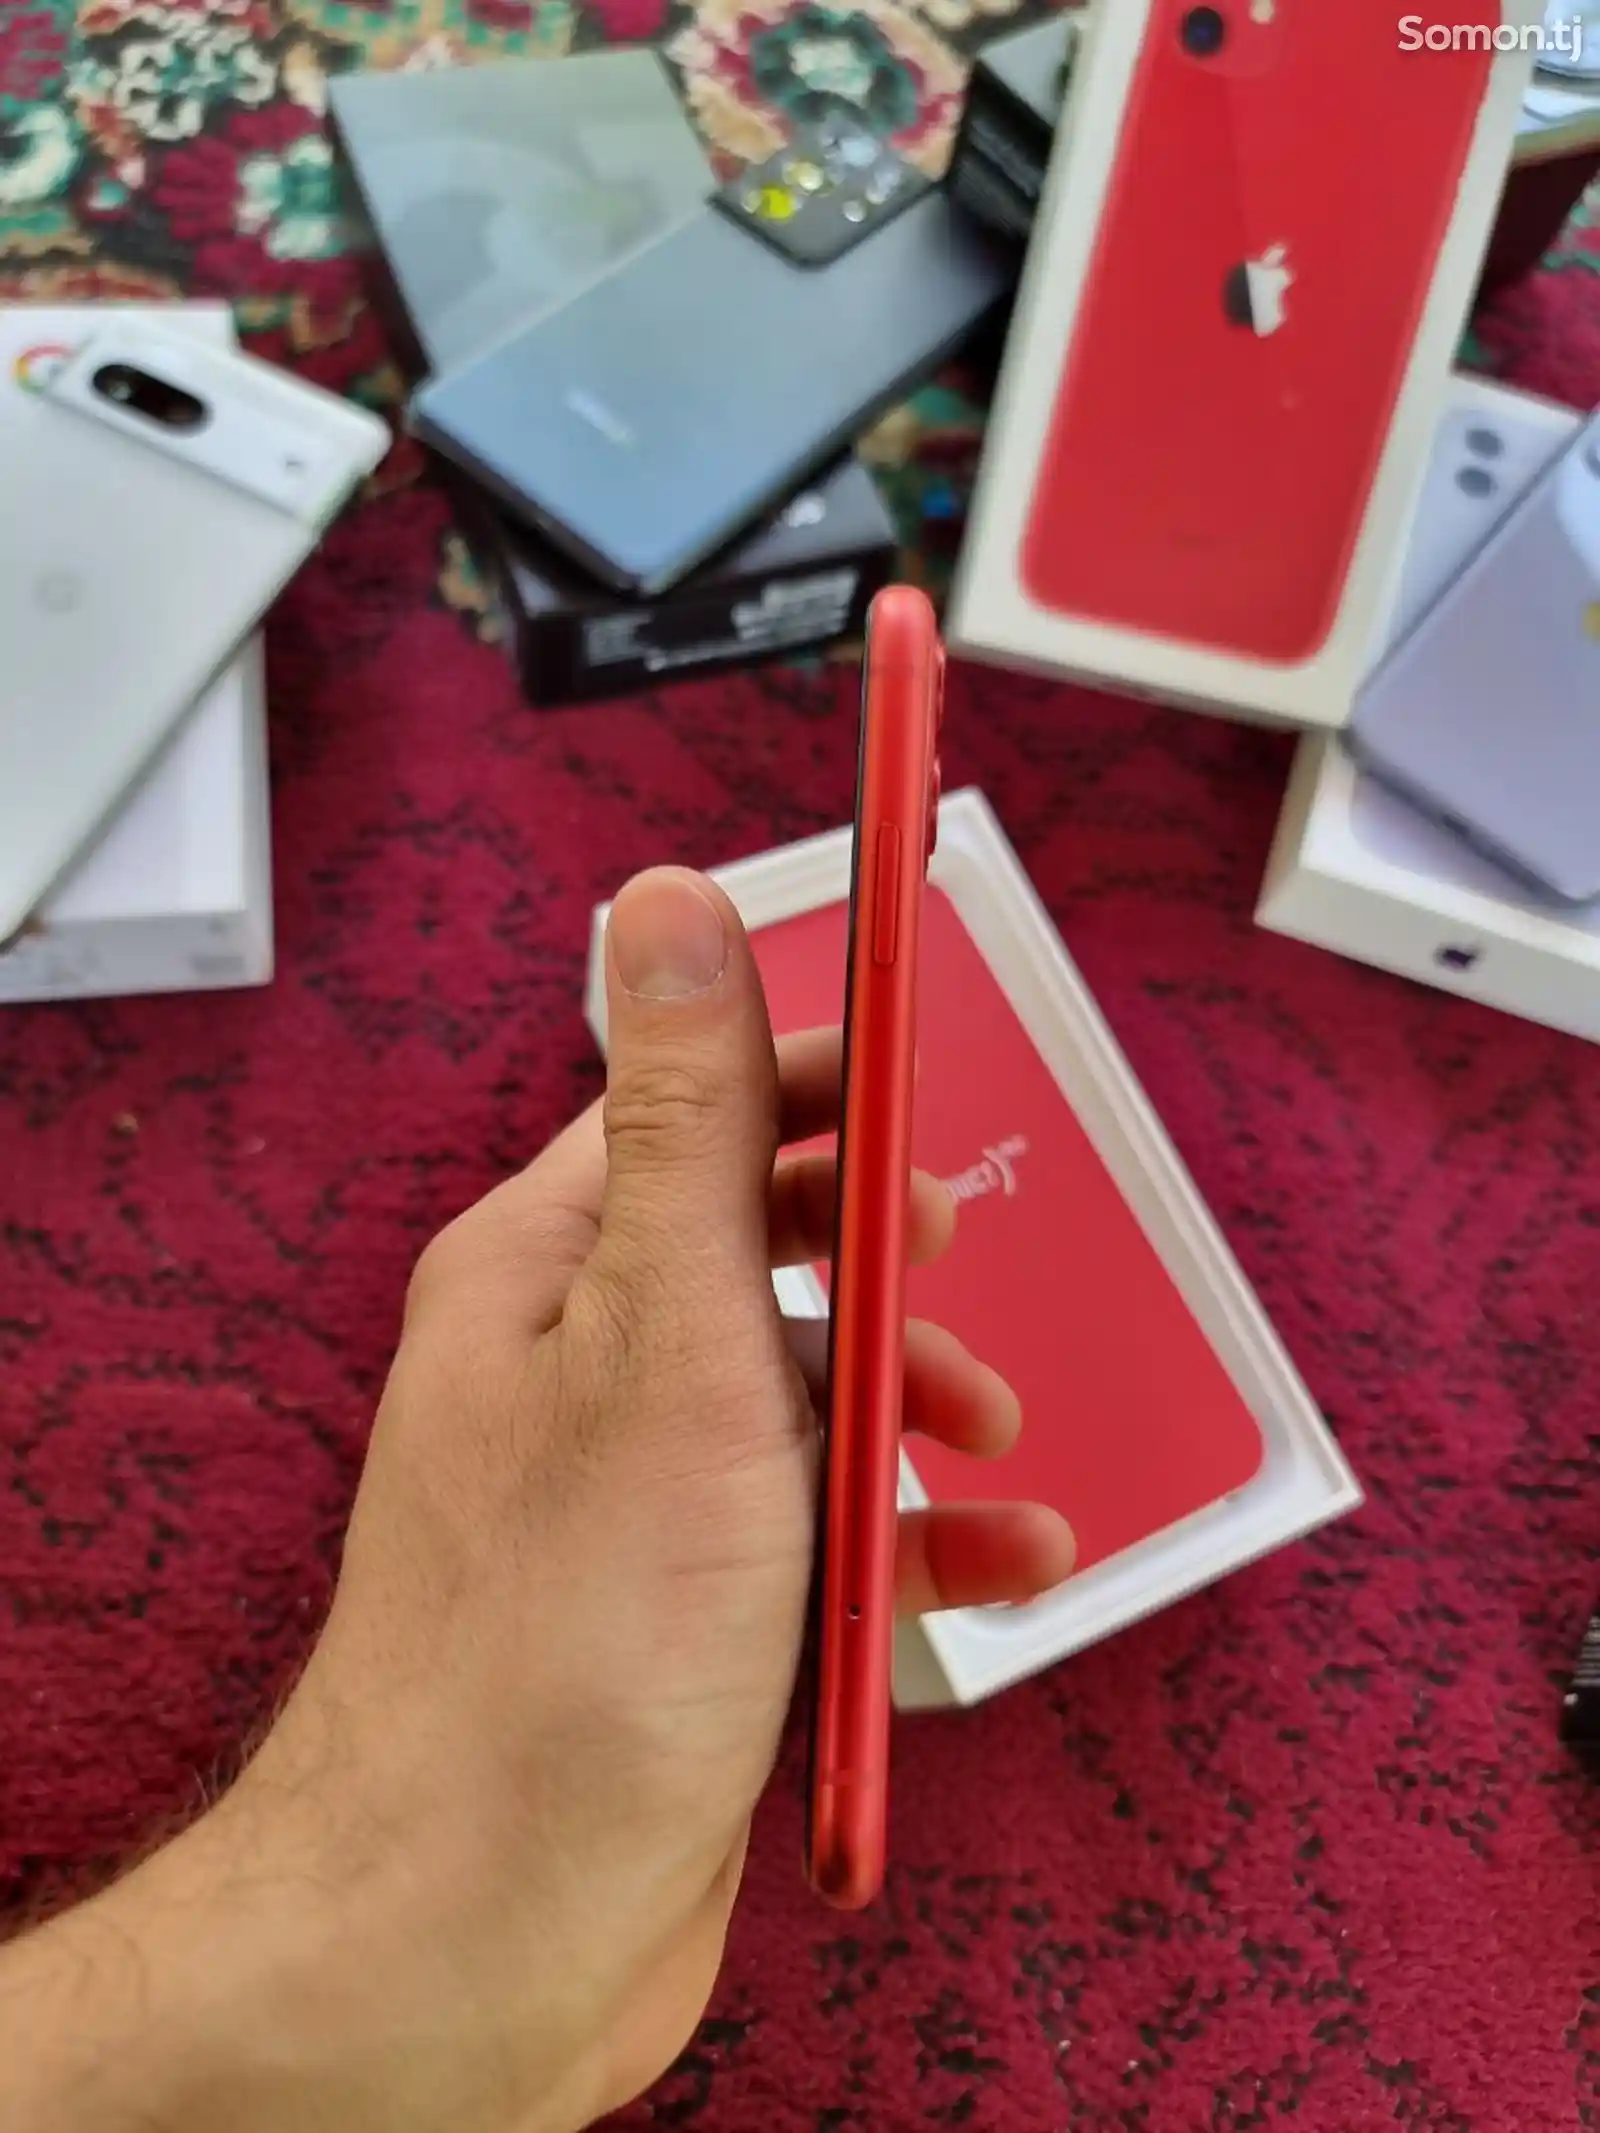 Apple iPhone 11, 64 gb, Product Red-3